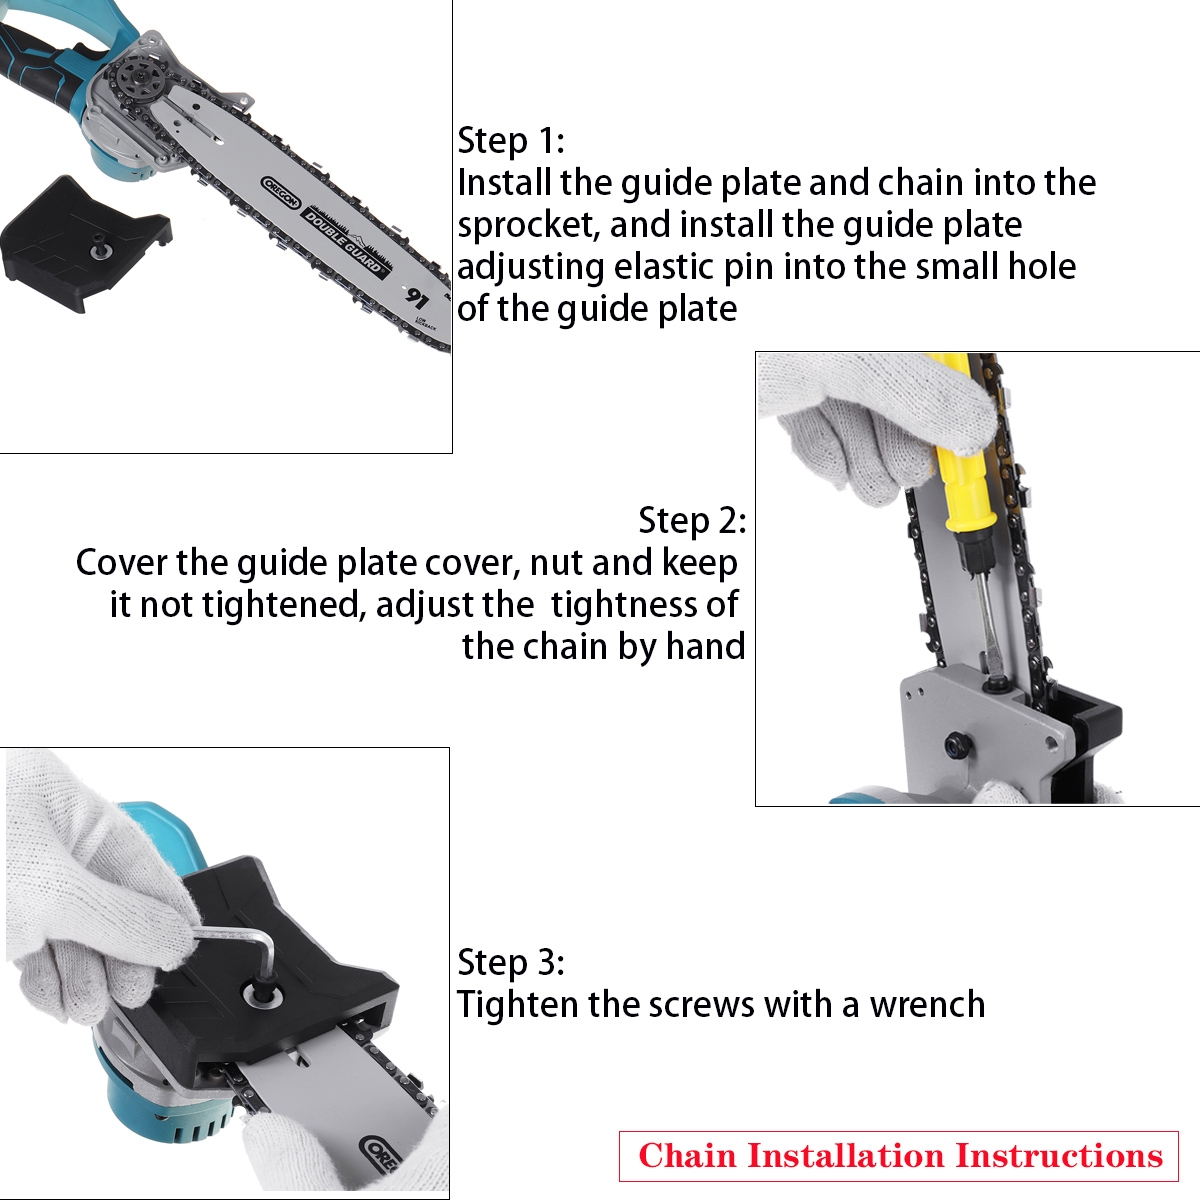 Doersupp-21V-Cordless-Electric-Chain-Saw-Wood-Mini-Cutter-One-Hand-Saw-Woodworking-Tool-1814645-12